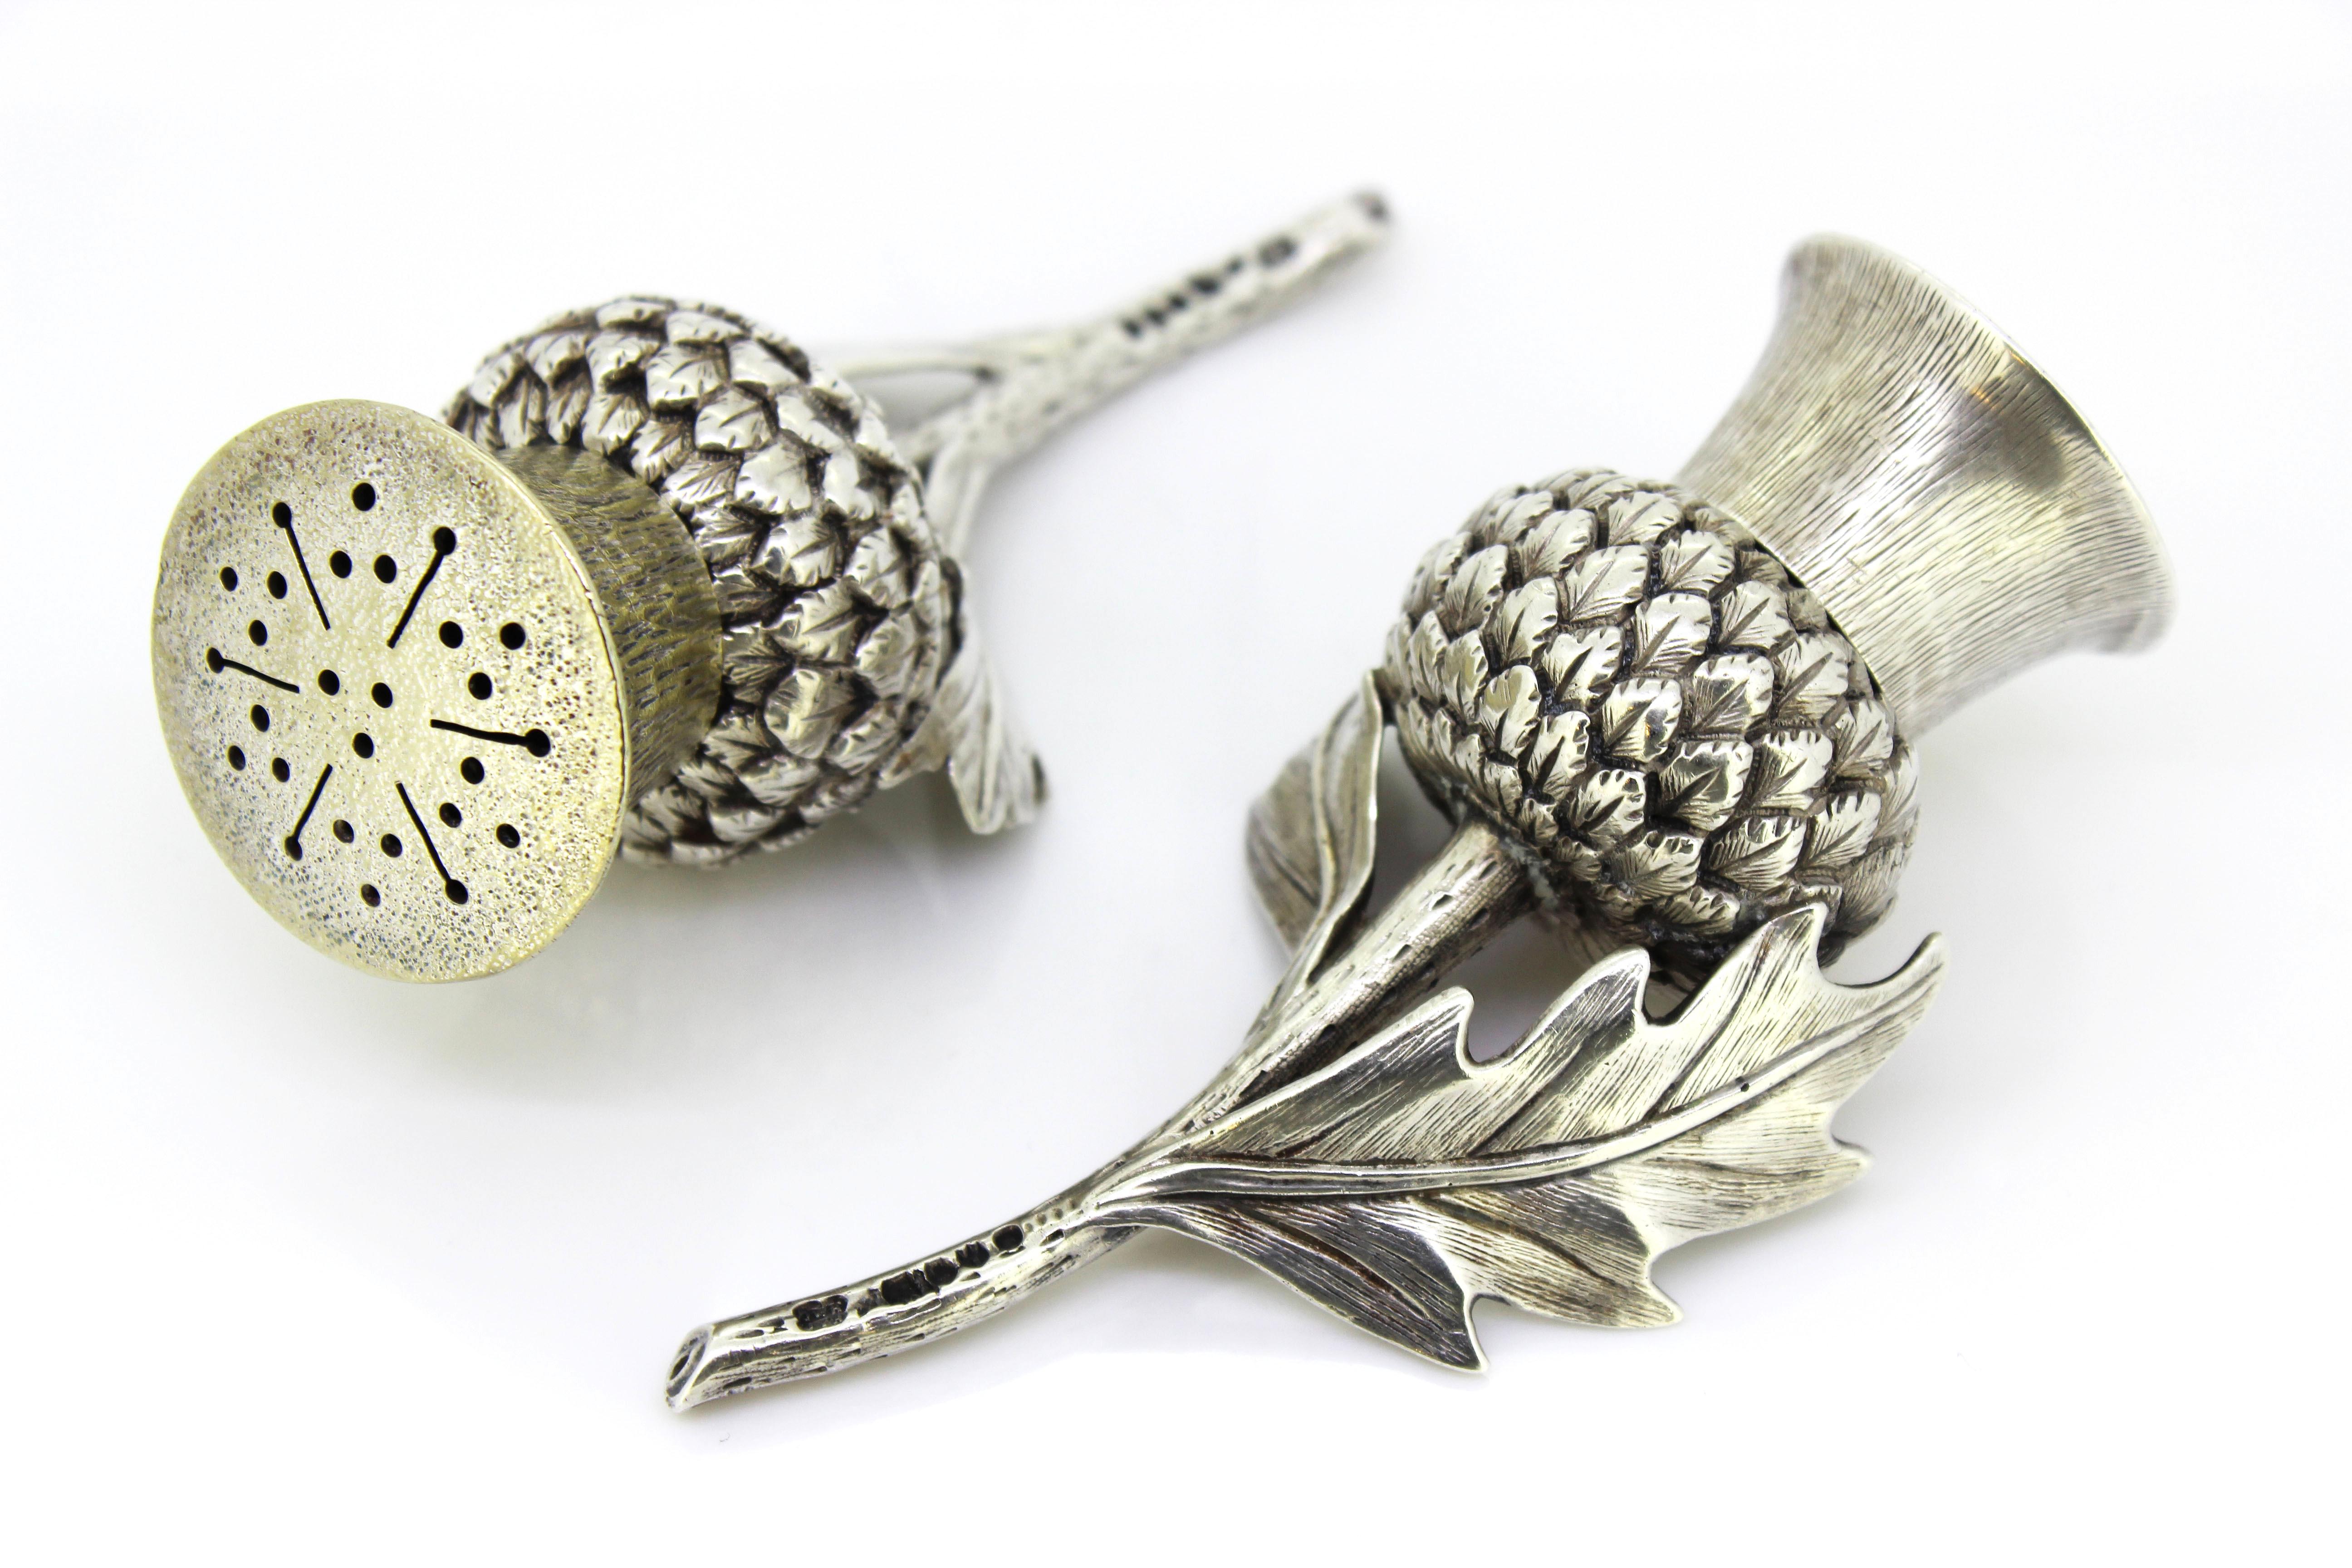 Antique Victorian silver salt and pepper shakers in a shape of thistle

Made in England, London, 1884
Maker: Jonathan Wilson Hukin and John Thomas Heath for Hukin & Heath

Dimensions:
Size : 10.2 x 5.3 x 2.8 cm
Weight: 154 grams

Condition: